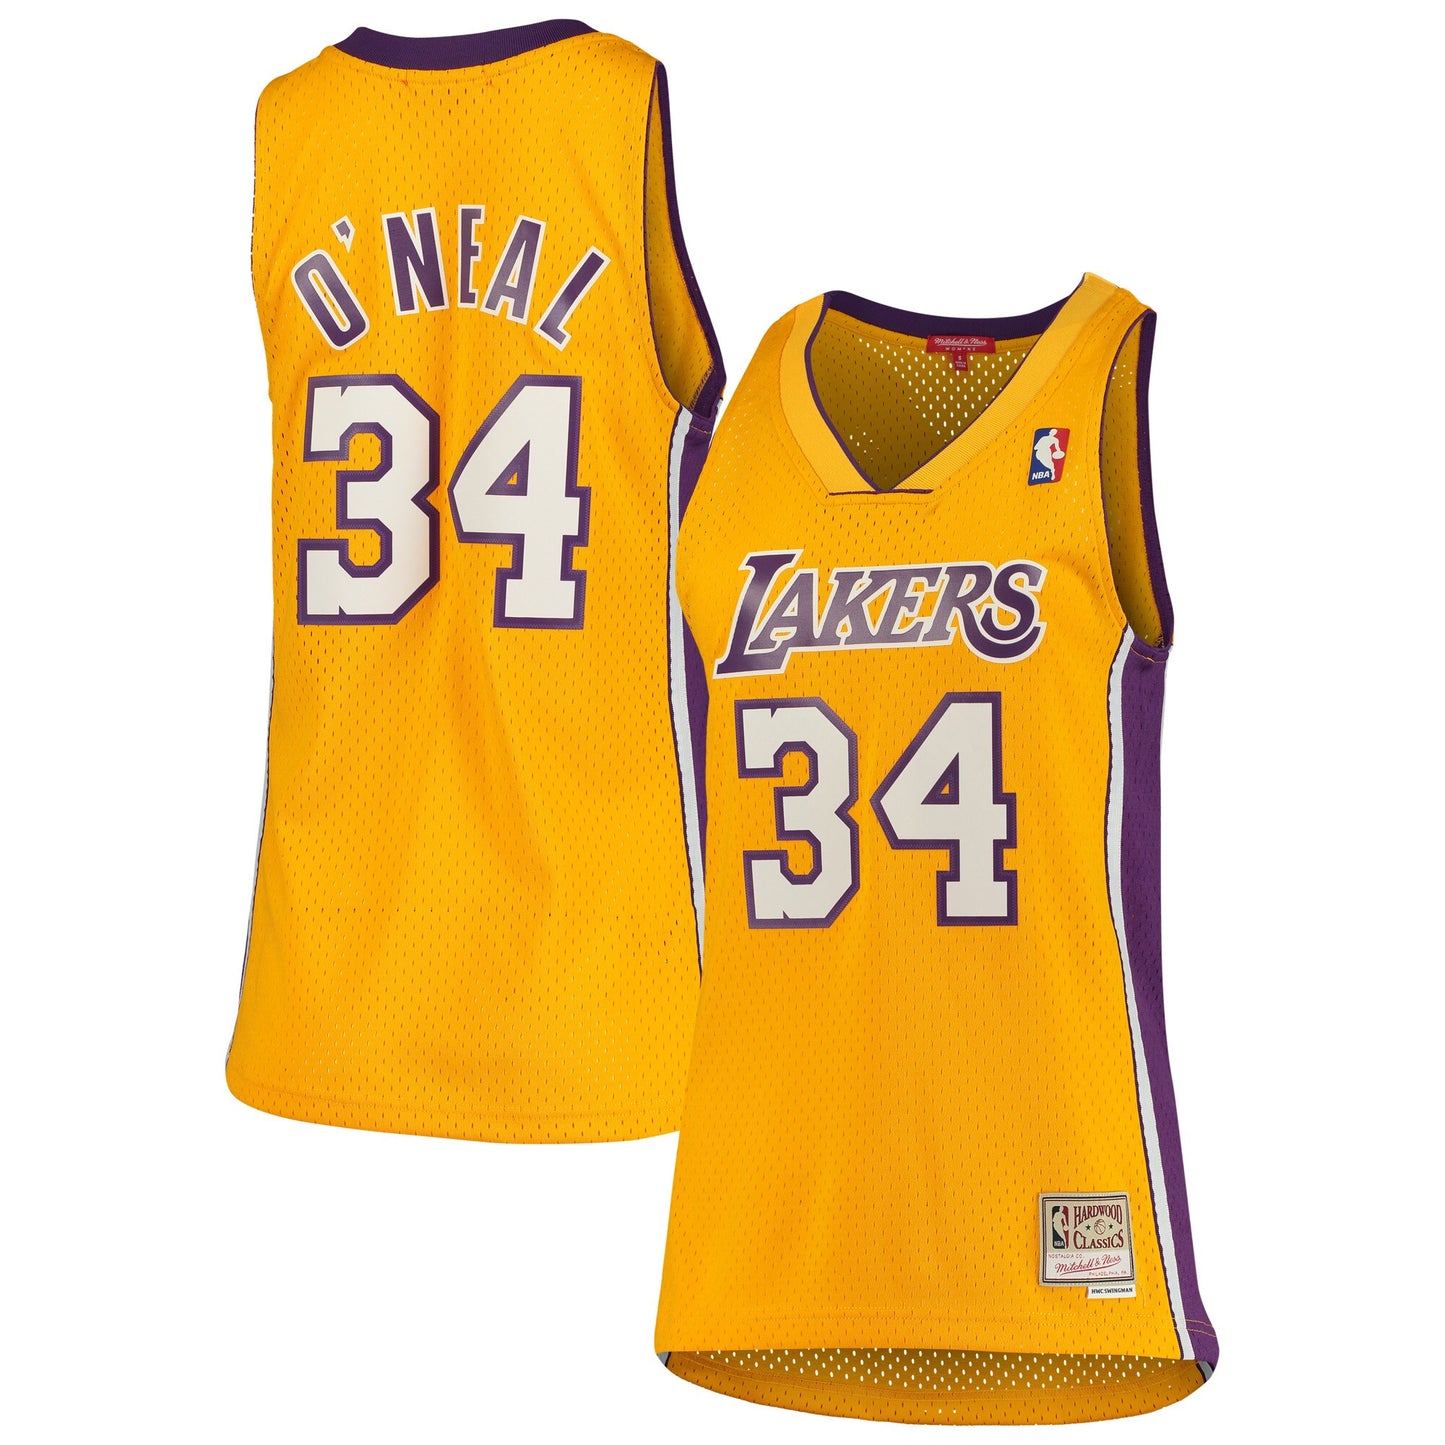 Shaquille O'Neal Los Angeles Lakers Mitchell & Ness Women's 1999-00 Hardwood Classics Swingman Jersey - Gold